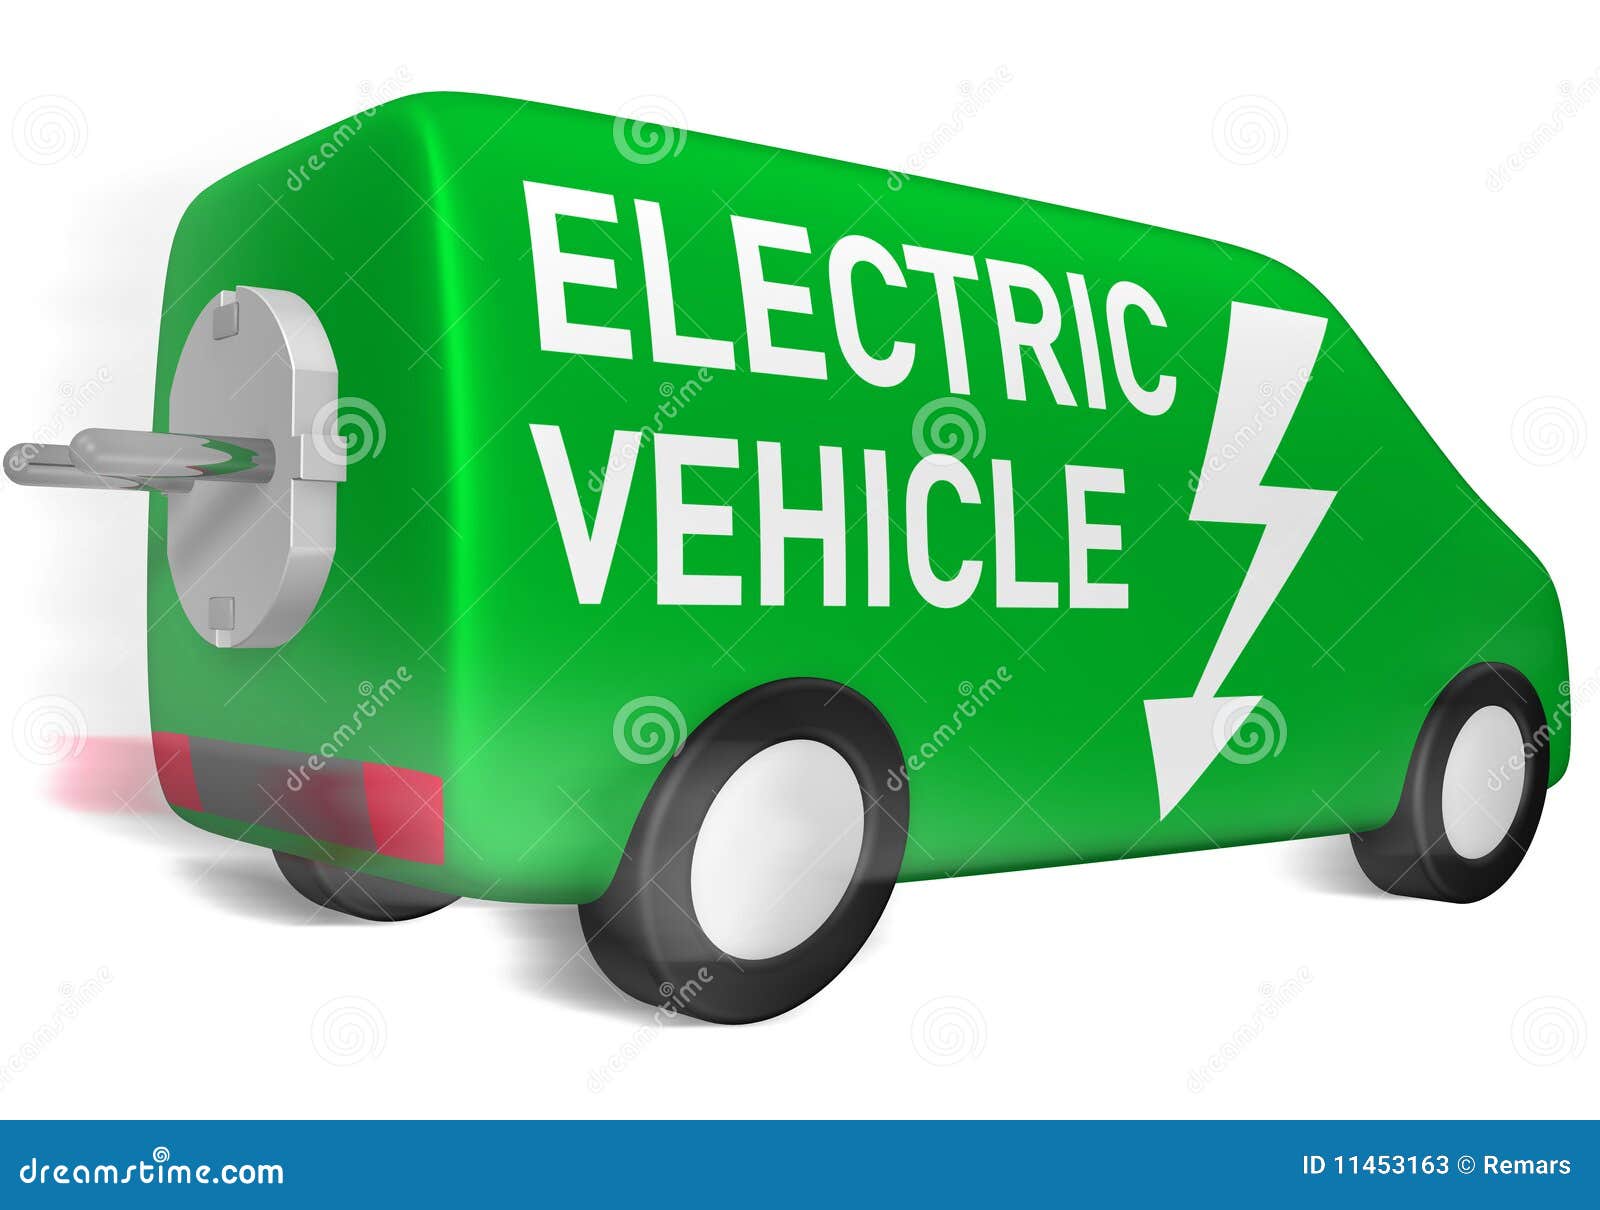 mr clipart vehicle download - photo #30